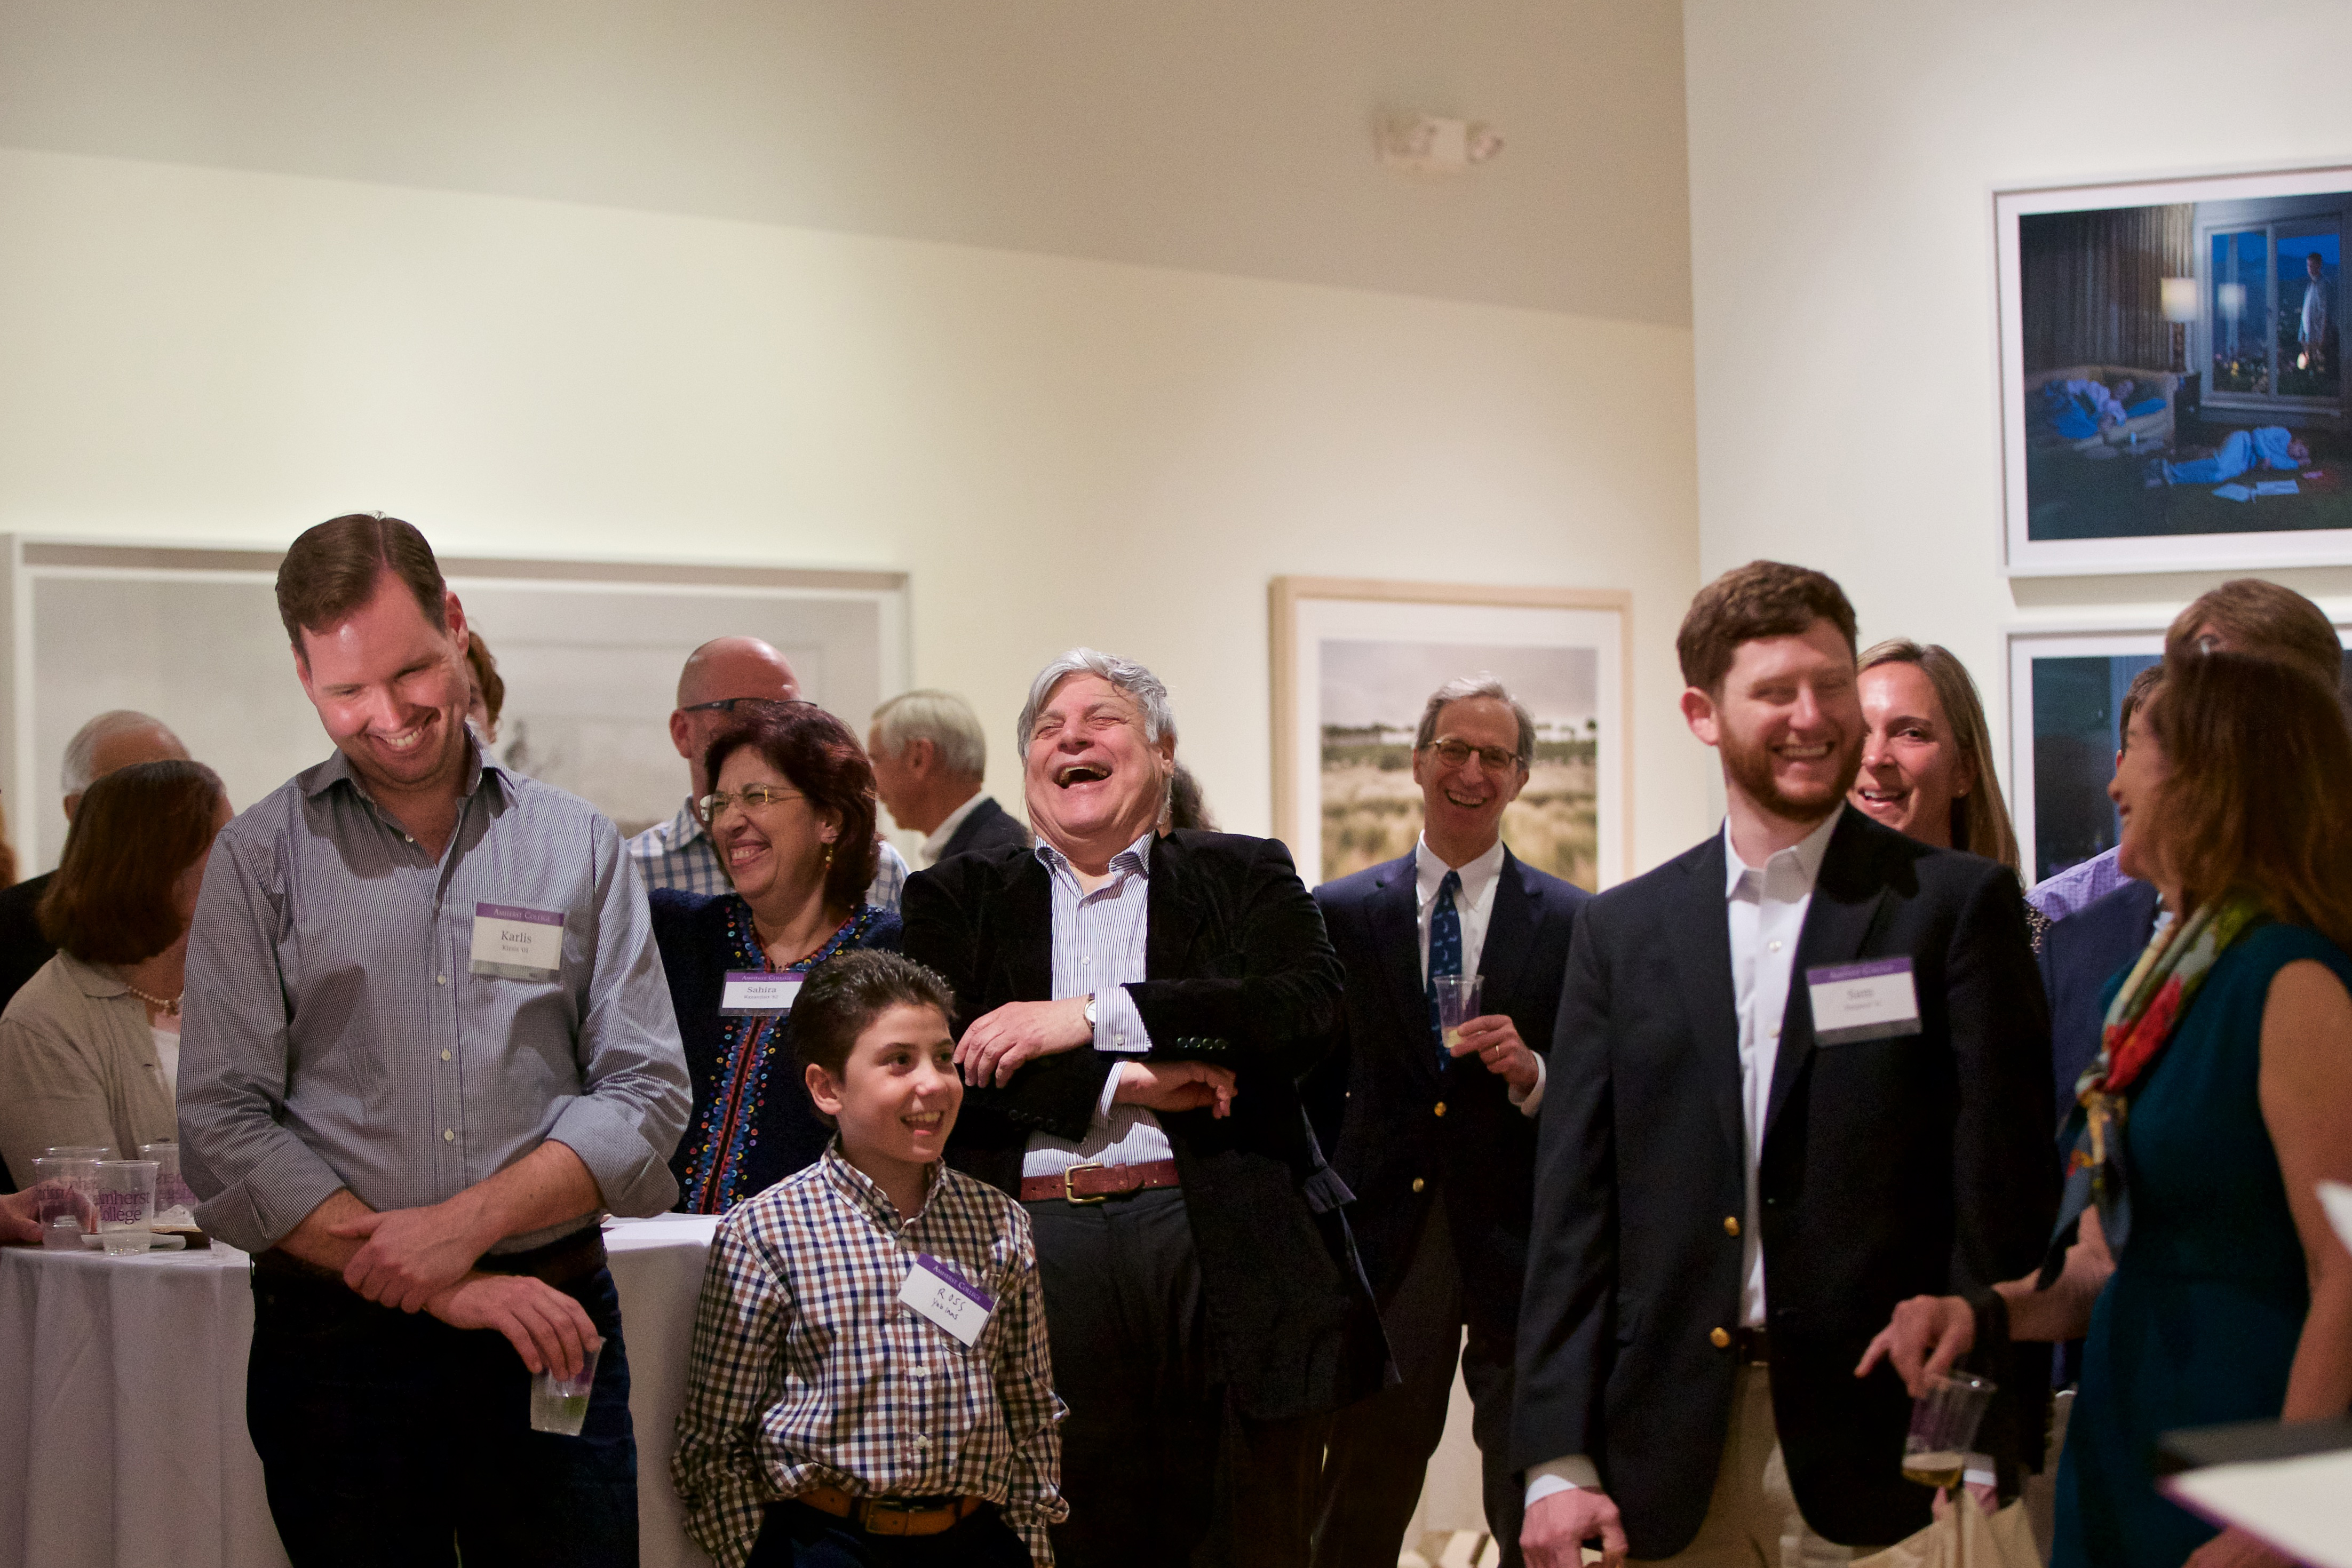 Rabinowitz and guests laughing